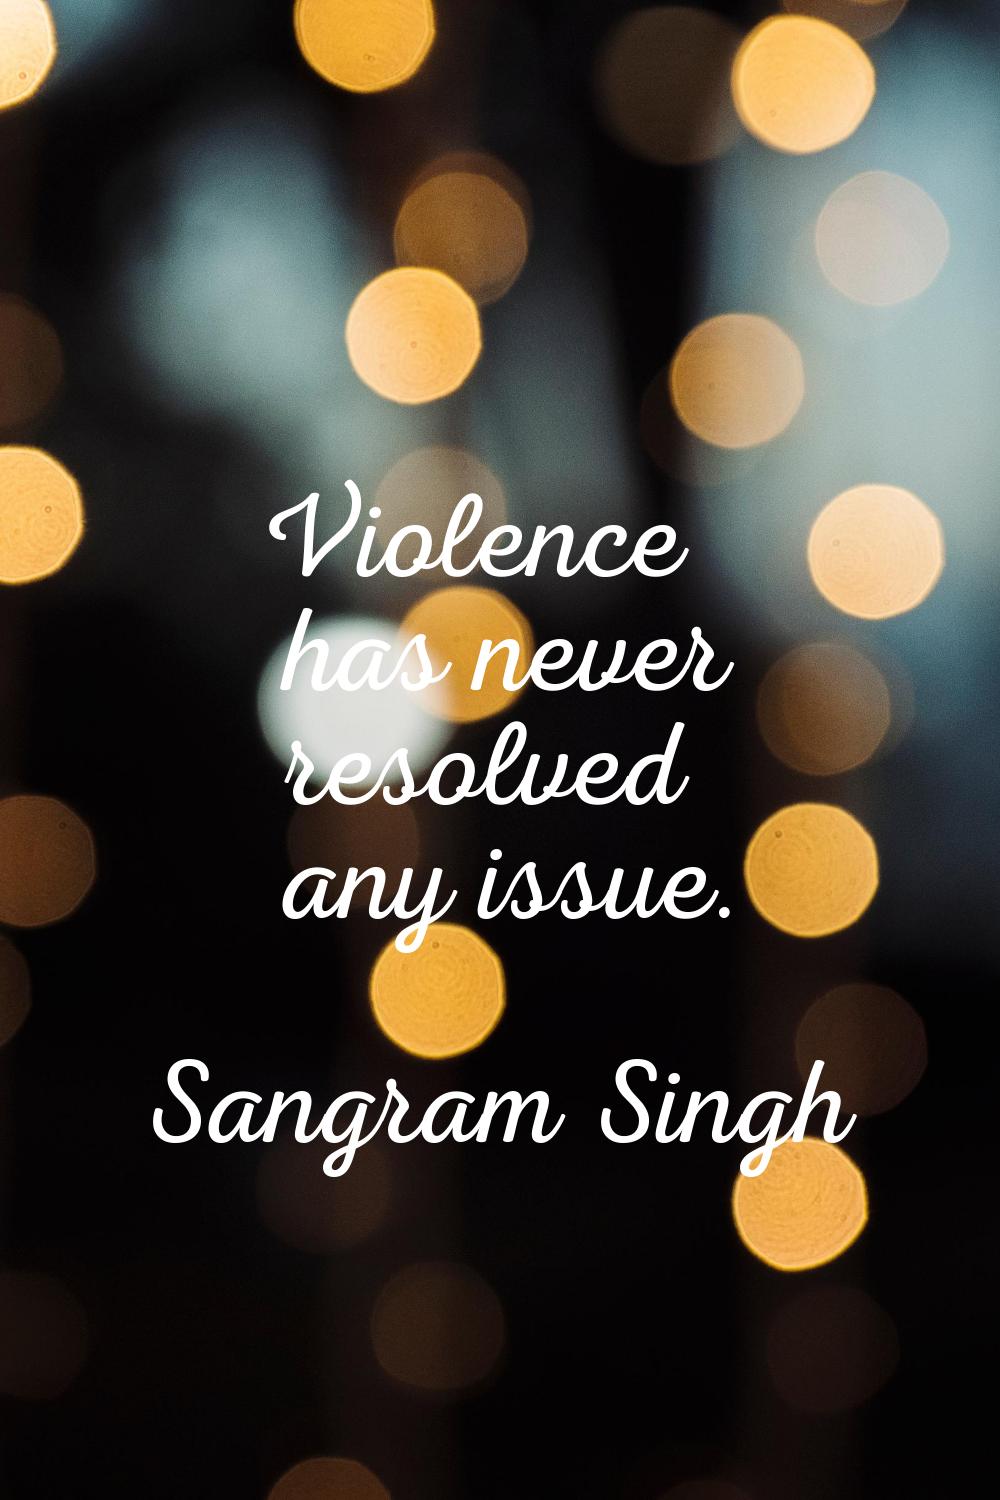 Violence has never resolved any issue.